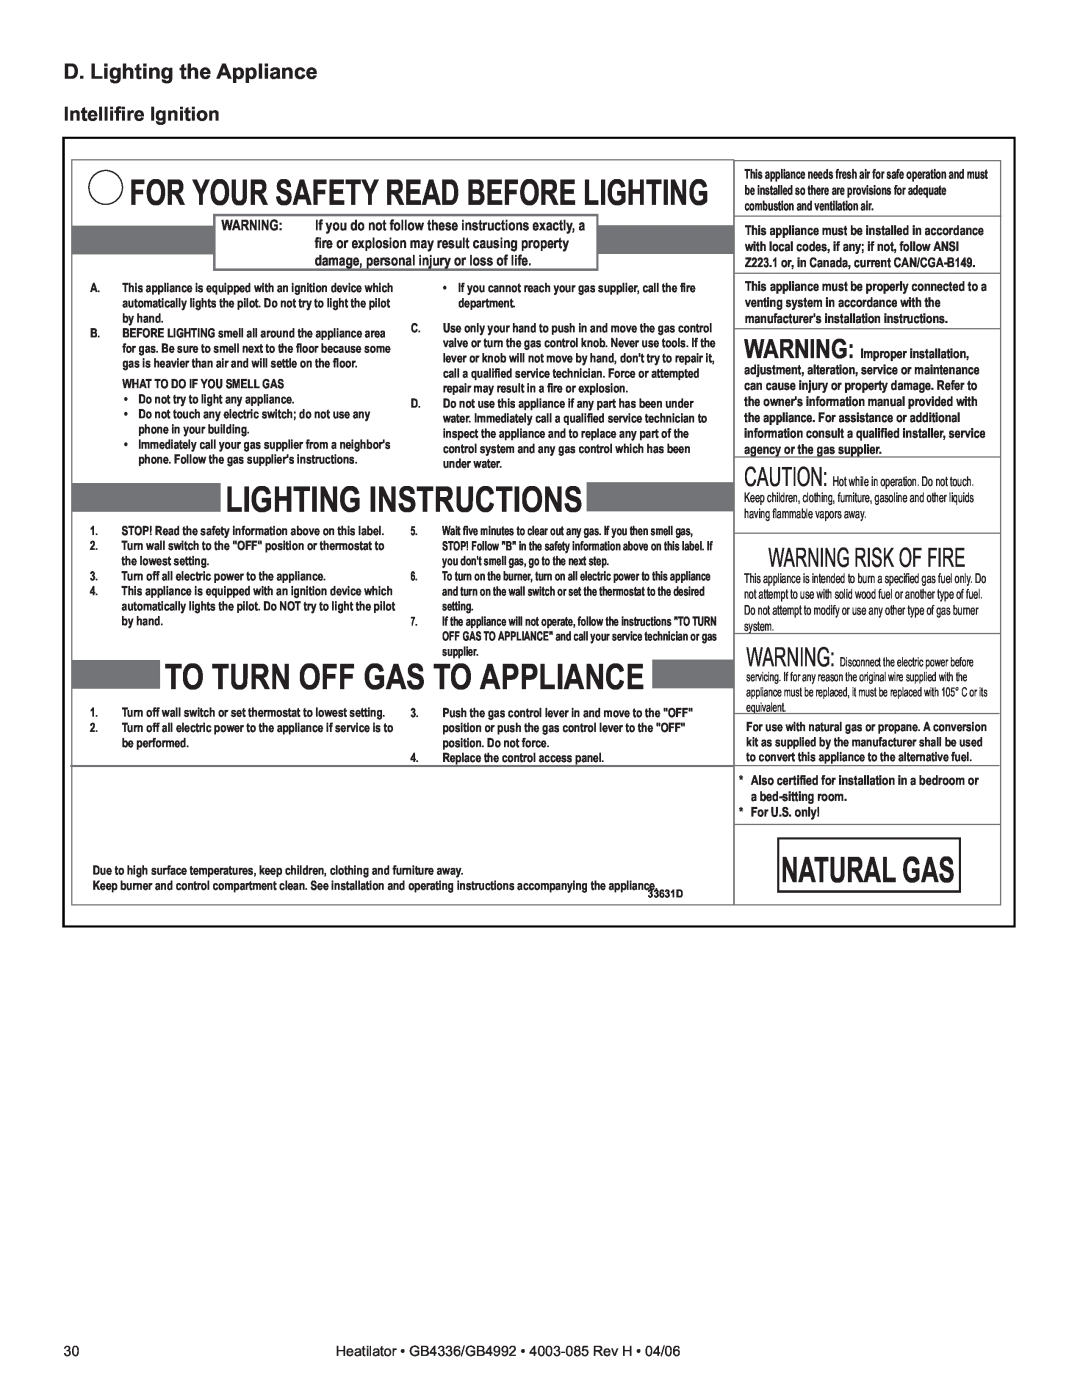 Heatiator GB4336 D. Lighting the Appliance, Warning Risk Of Fire, For Your Safety Read Before Lighting, Natural Gas 